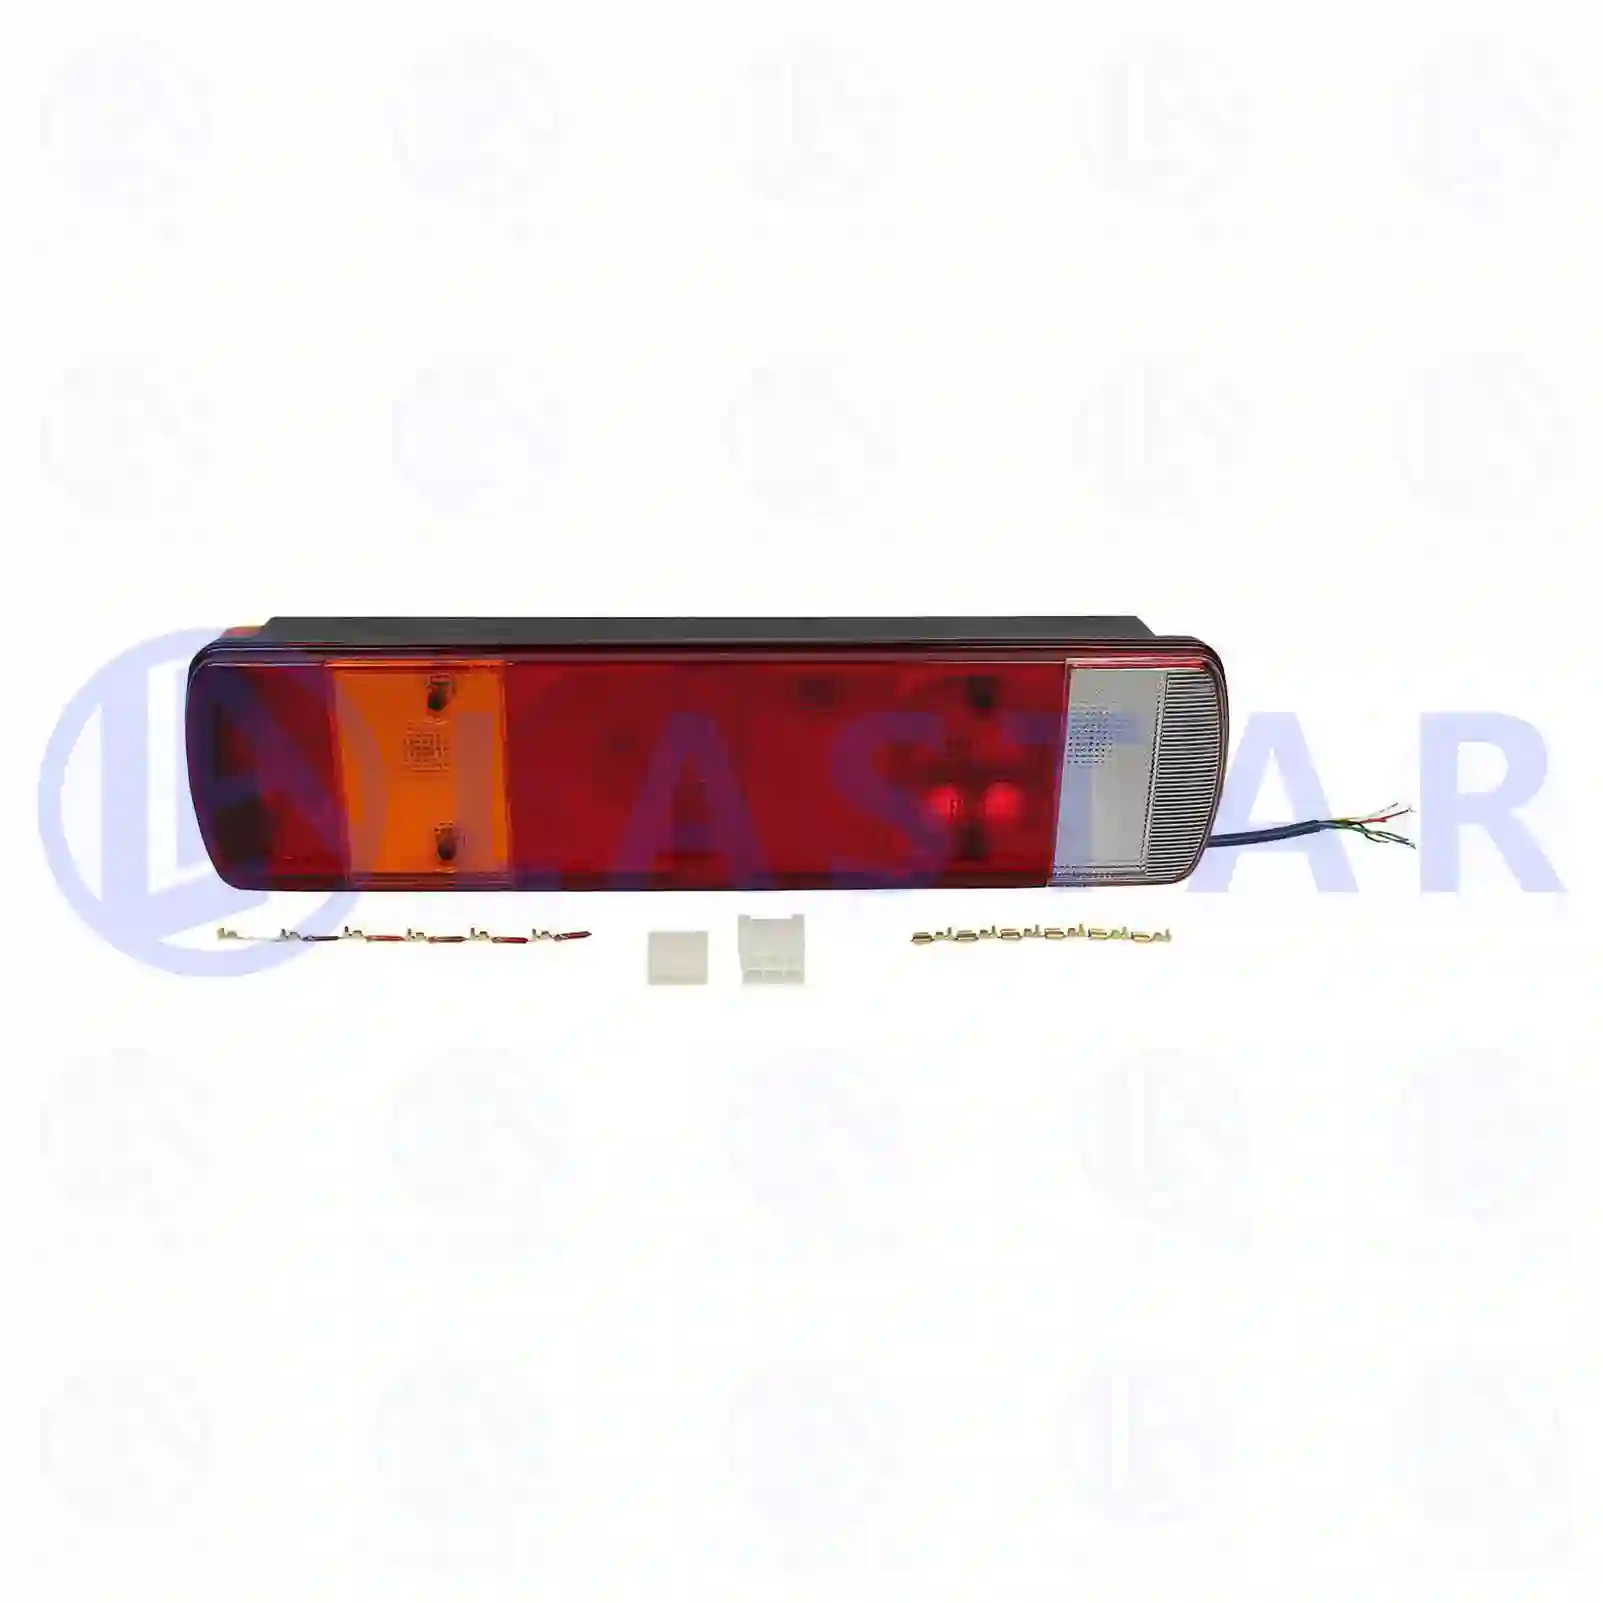 Tail lamp, left, 77711239, 867499, 36007, 1371974, 1371976, 1371978, 1371980, 1387877, 1414366, 1414368, 1436851, 1436854, 1436867, 1504605, 1504608, 1508178, 504608 ||  77711239 Lastar Spare Part | Truck Spare Parts, Auotomotive Spare Parts Tail lamp, left, 77711239, 867499, 36007, 1371974, 1371976, 1371978, 1371980, 1387877, 1414366, 1414368, 1436851, 1436854, 1436867, 1504605, 1504608, 1508178, 504608 ||  77711239 Lastar Spare Part | Truck Spare Parts, Auotomotive Spare Parts